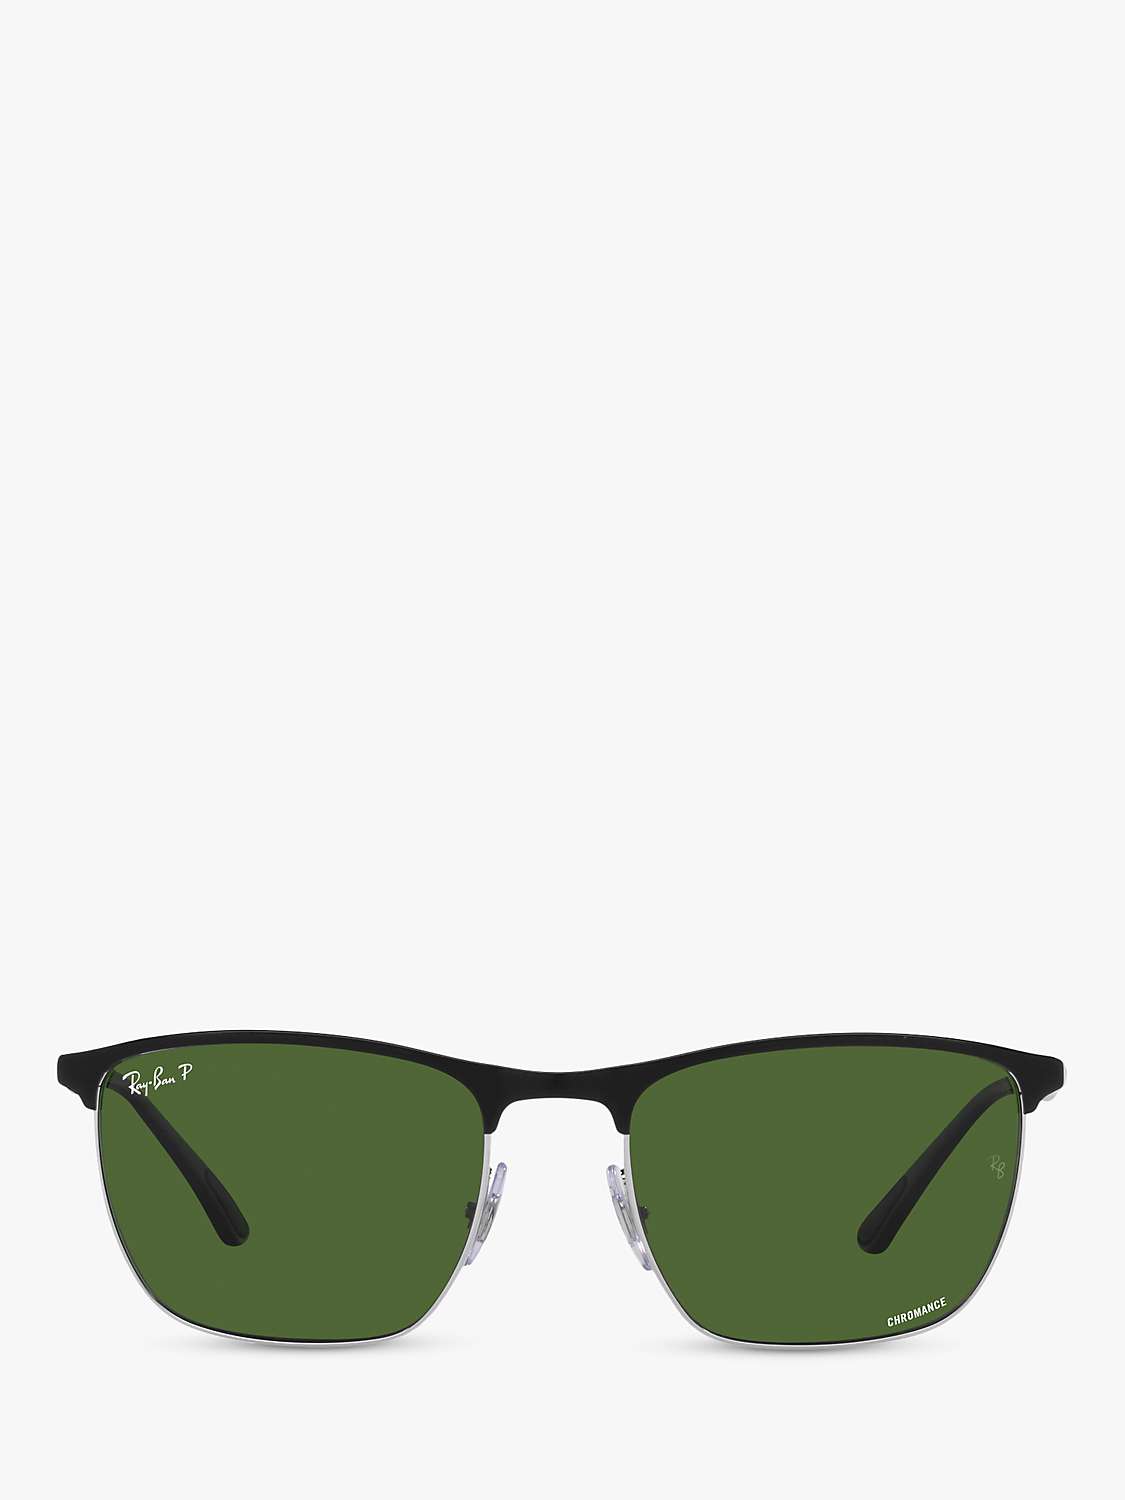 Buy Ray-Ban RB36869 Unisex Polarised Square Sunglasses, Black on Silver/Green Online at johnlewis.com